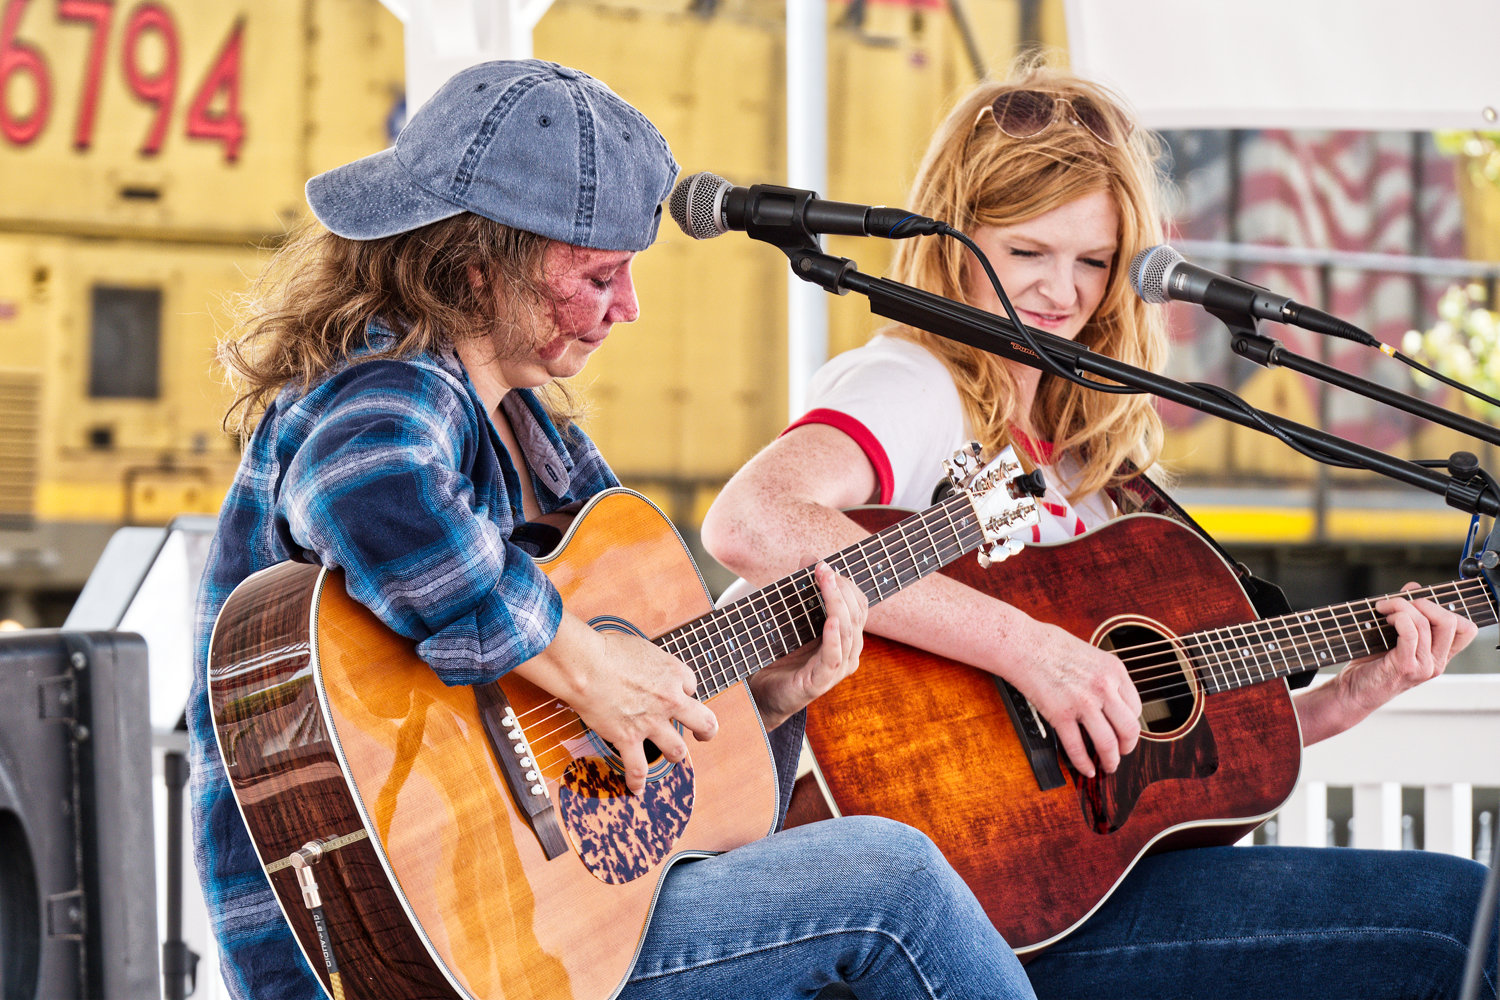 Heather Little and Meredith Crawford play as the Union Pacific train roars through the downtown area.